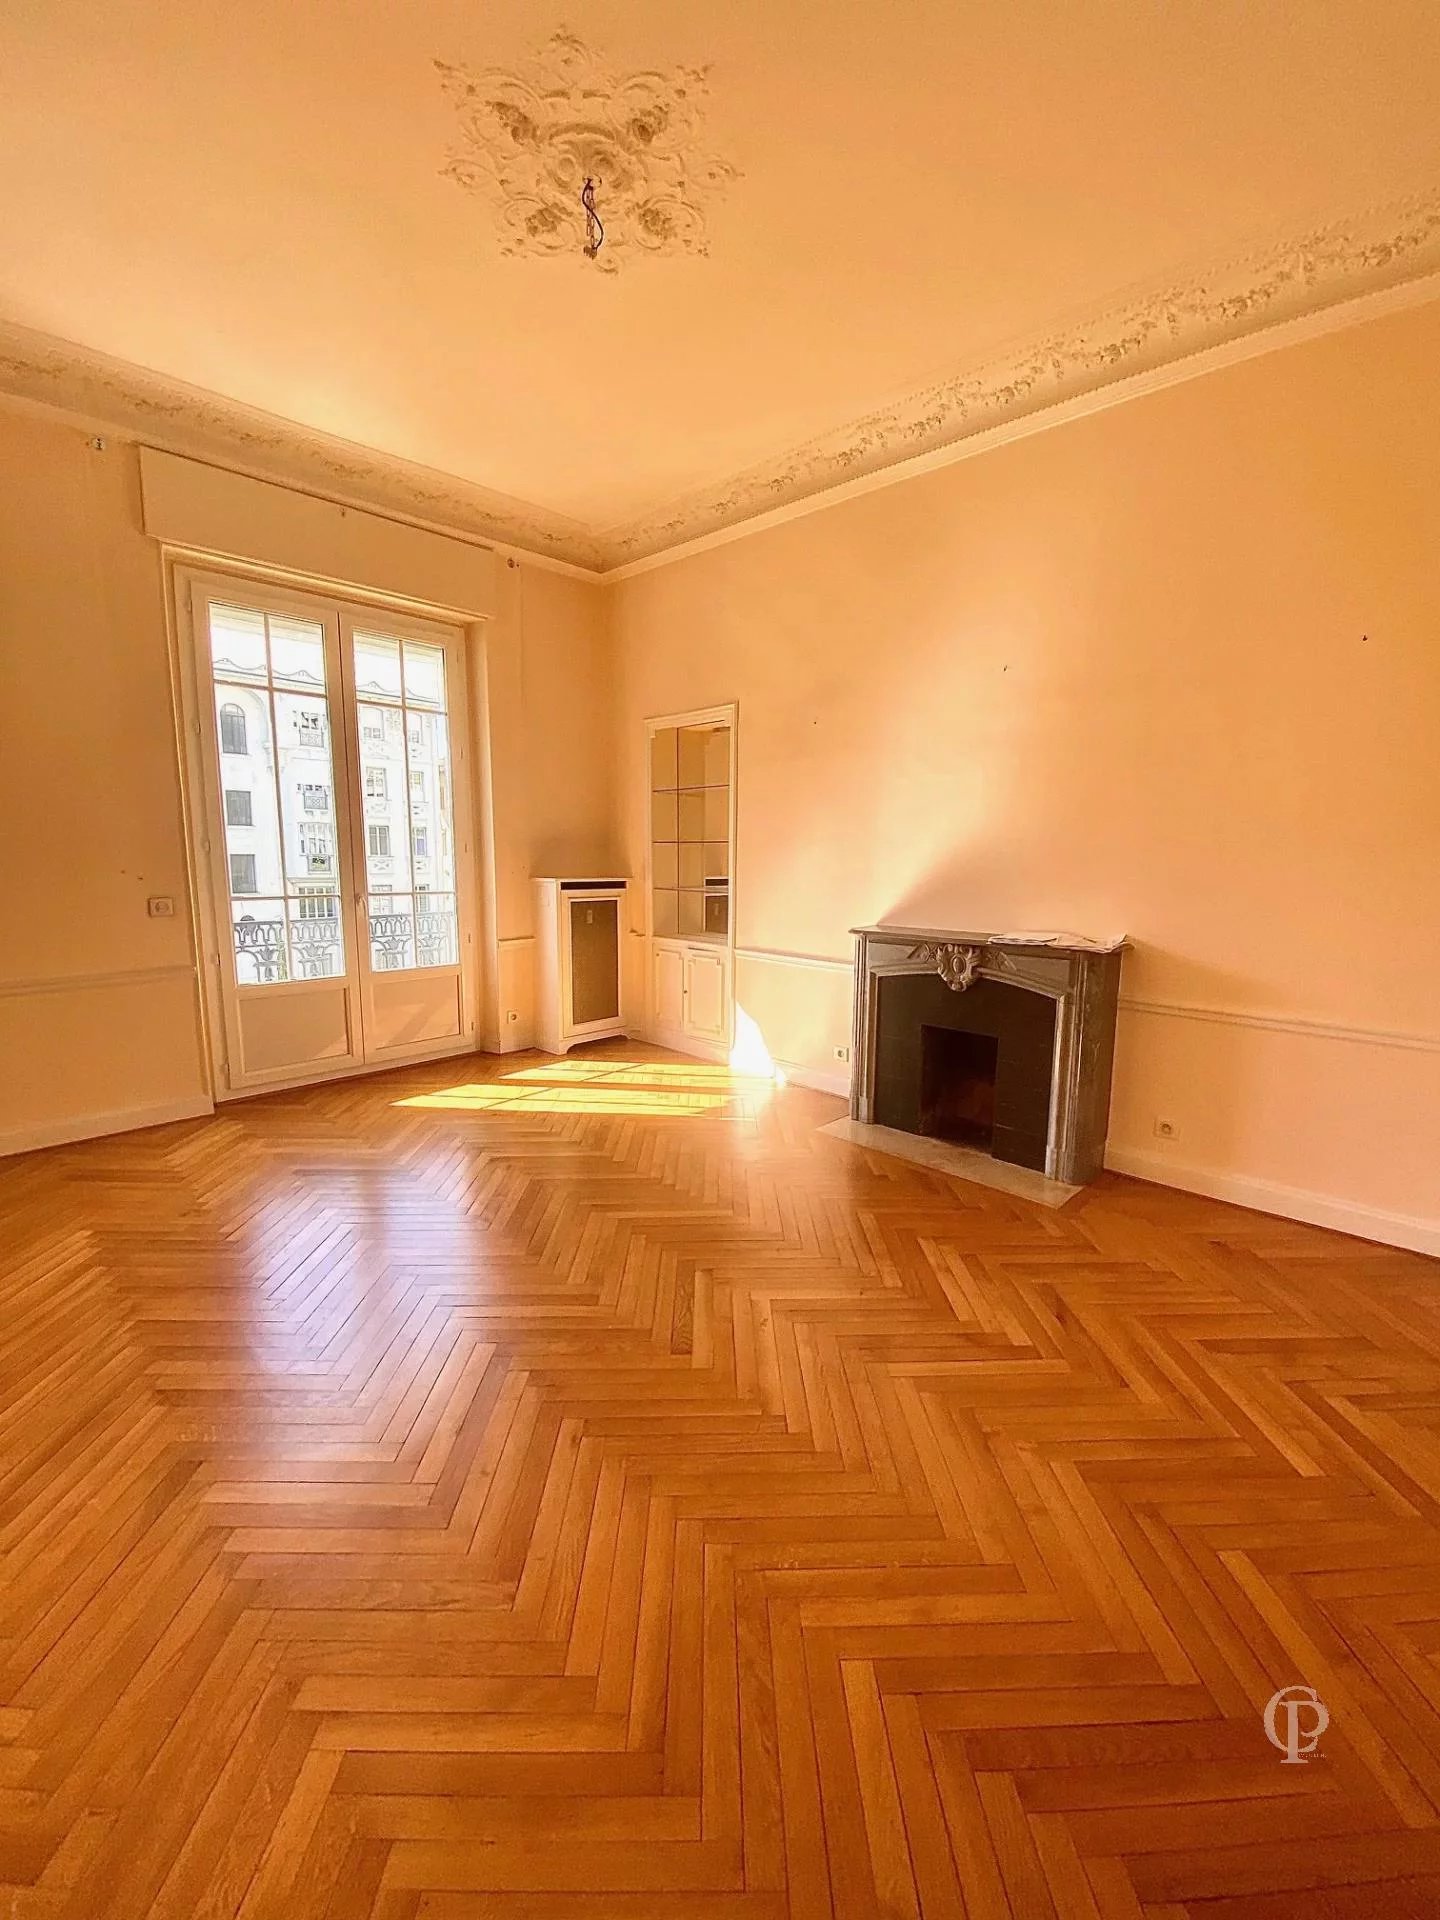 NICE PASSY/PASSY DEPOILLY 2/3 BEDROOMS